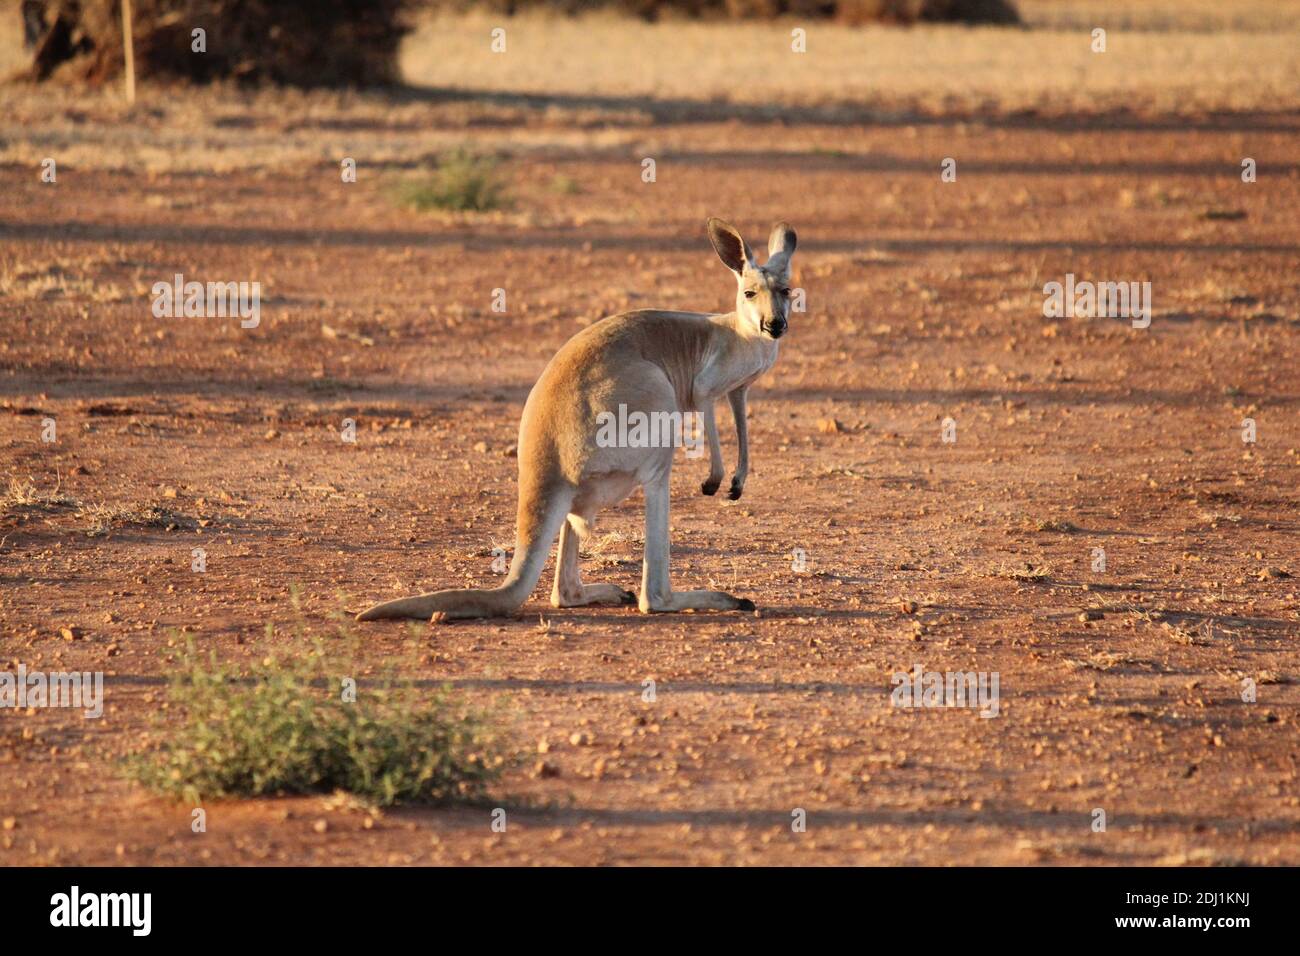 Red Kangaroo in a dry Western Australia landscape at sunset Stock Photo